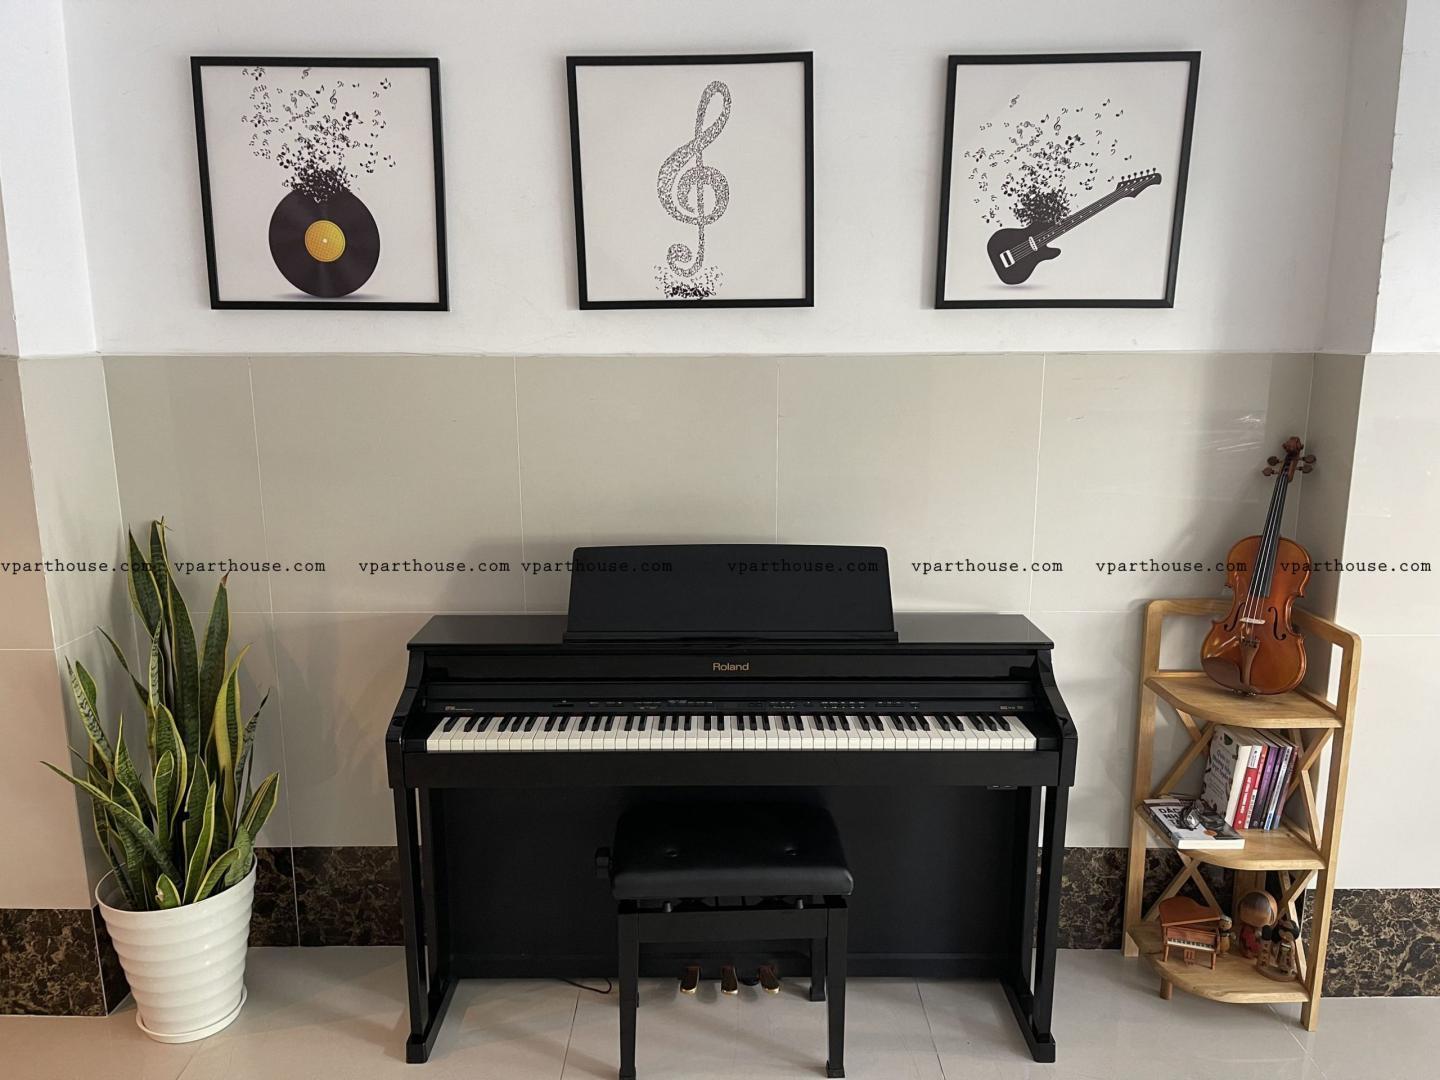 piano điện Roland HP-505 PE